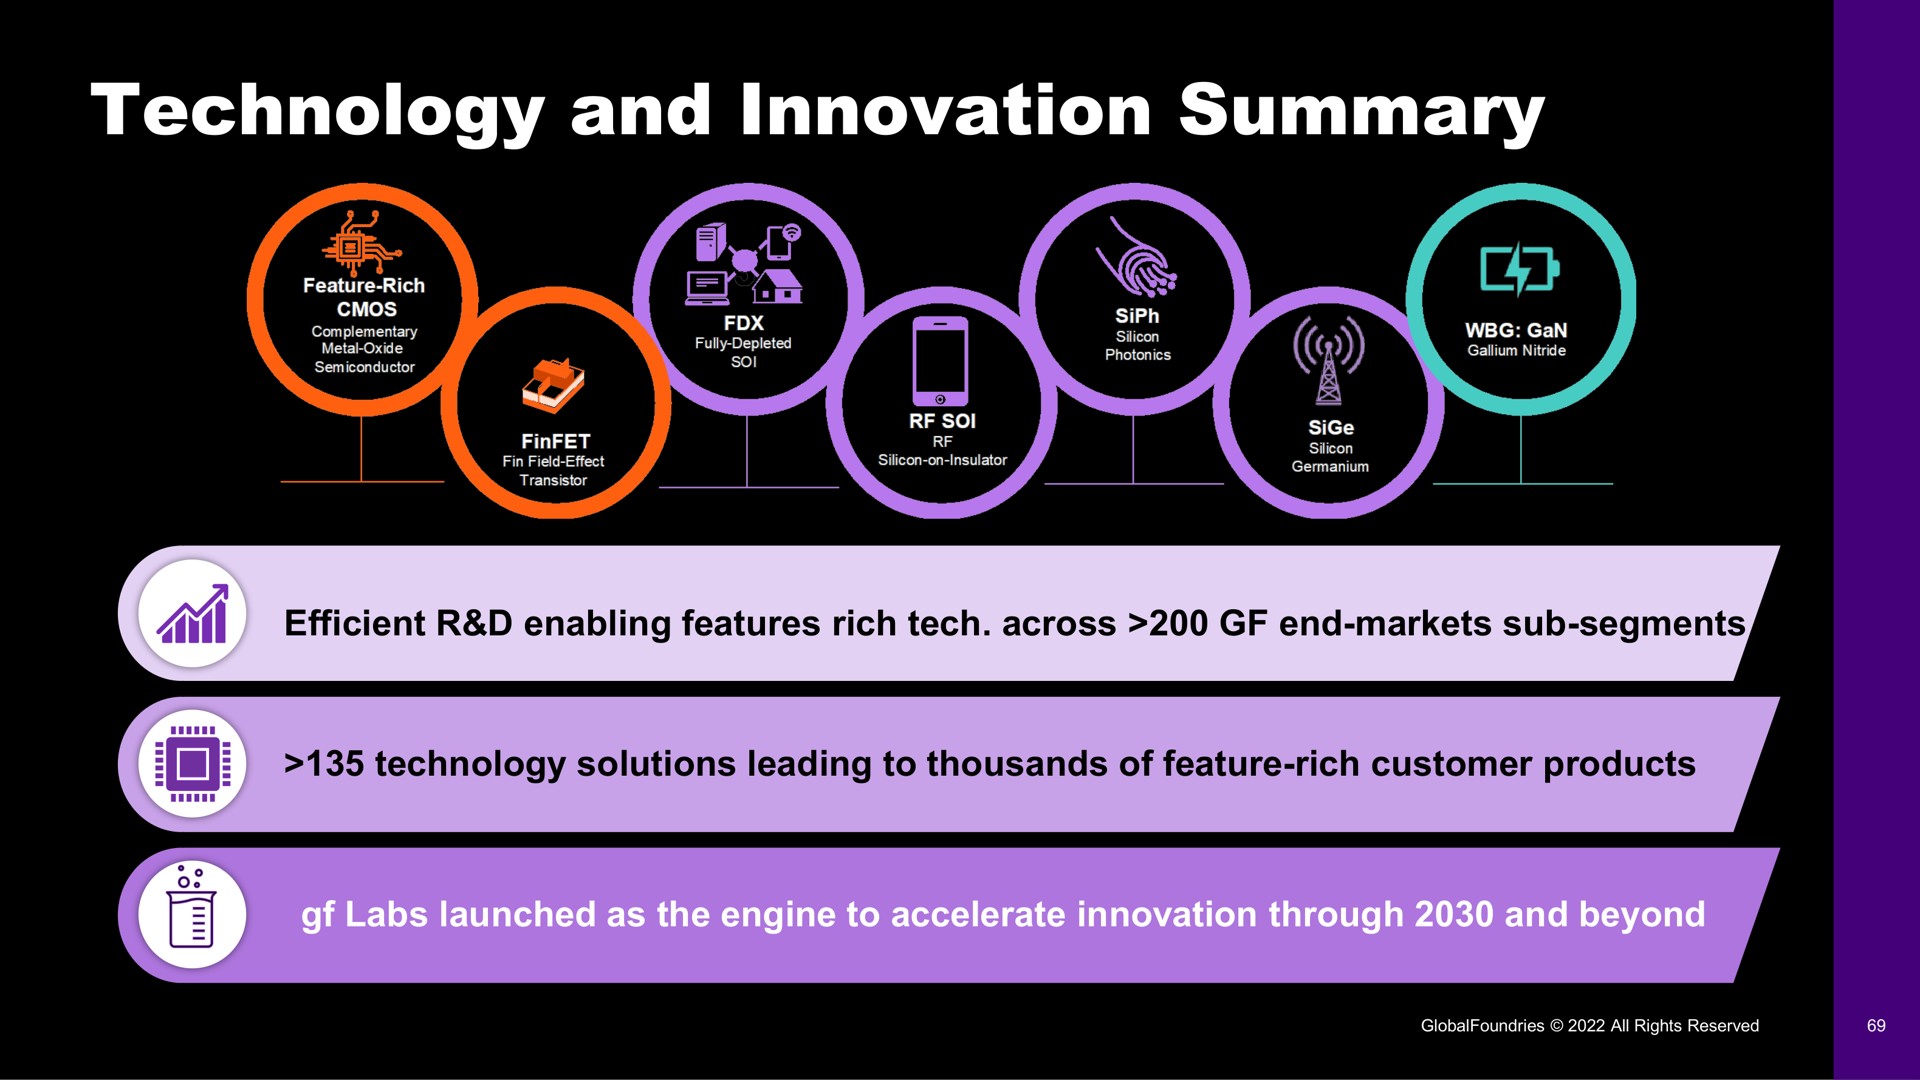 technology and innovation summary | GlobalFoundries